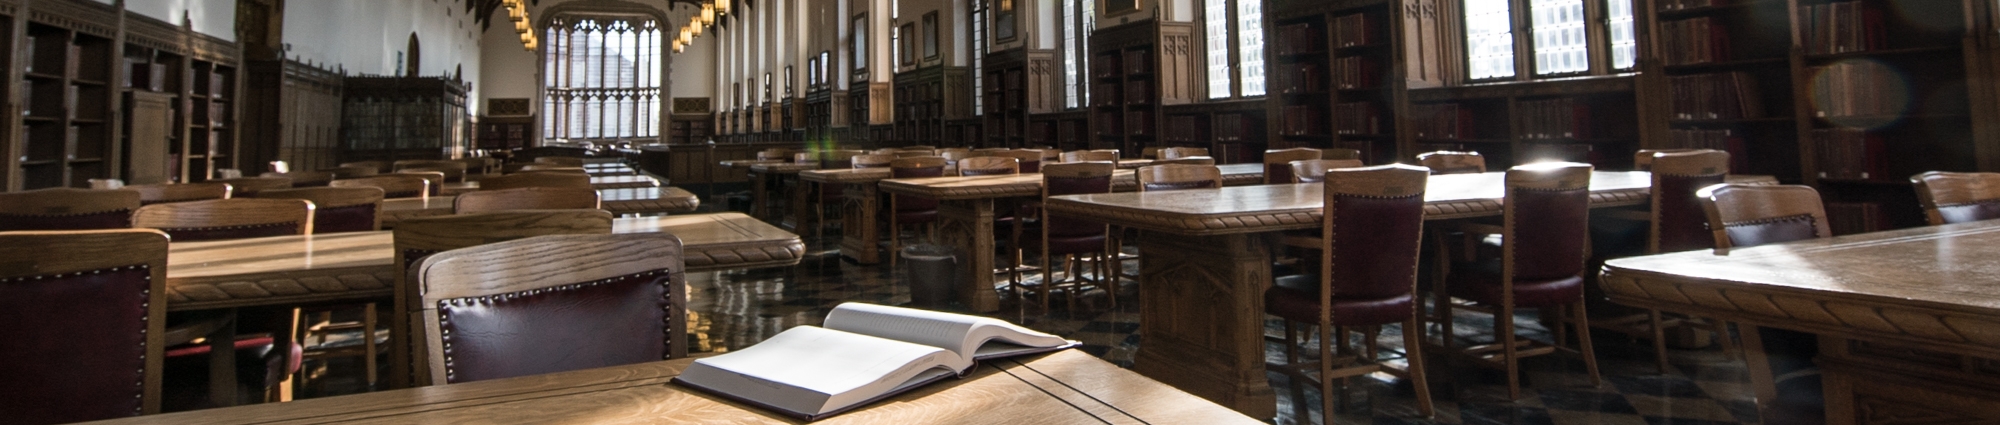 A photo of the Great Reading Room with a book open on a table